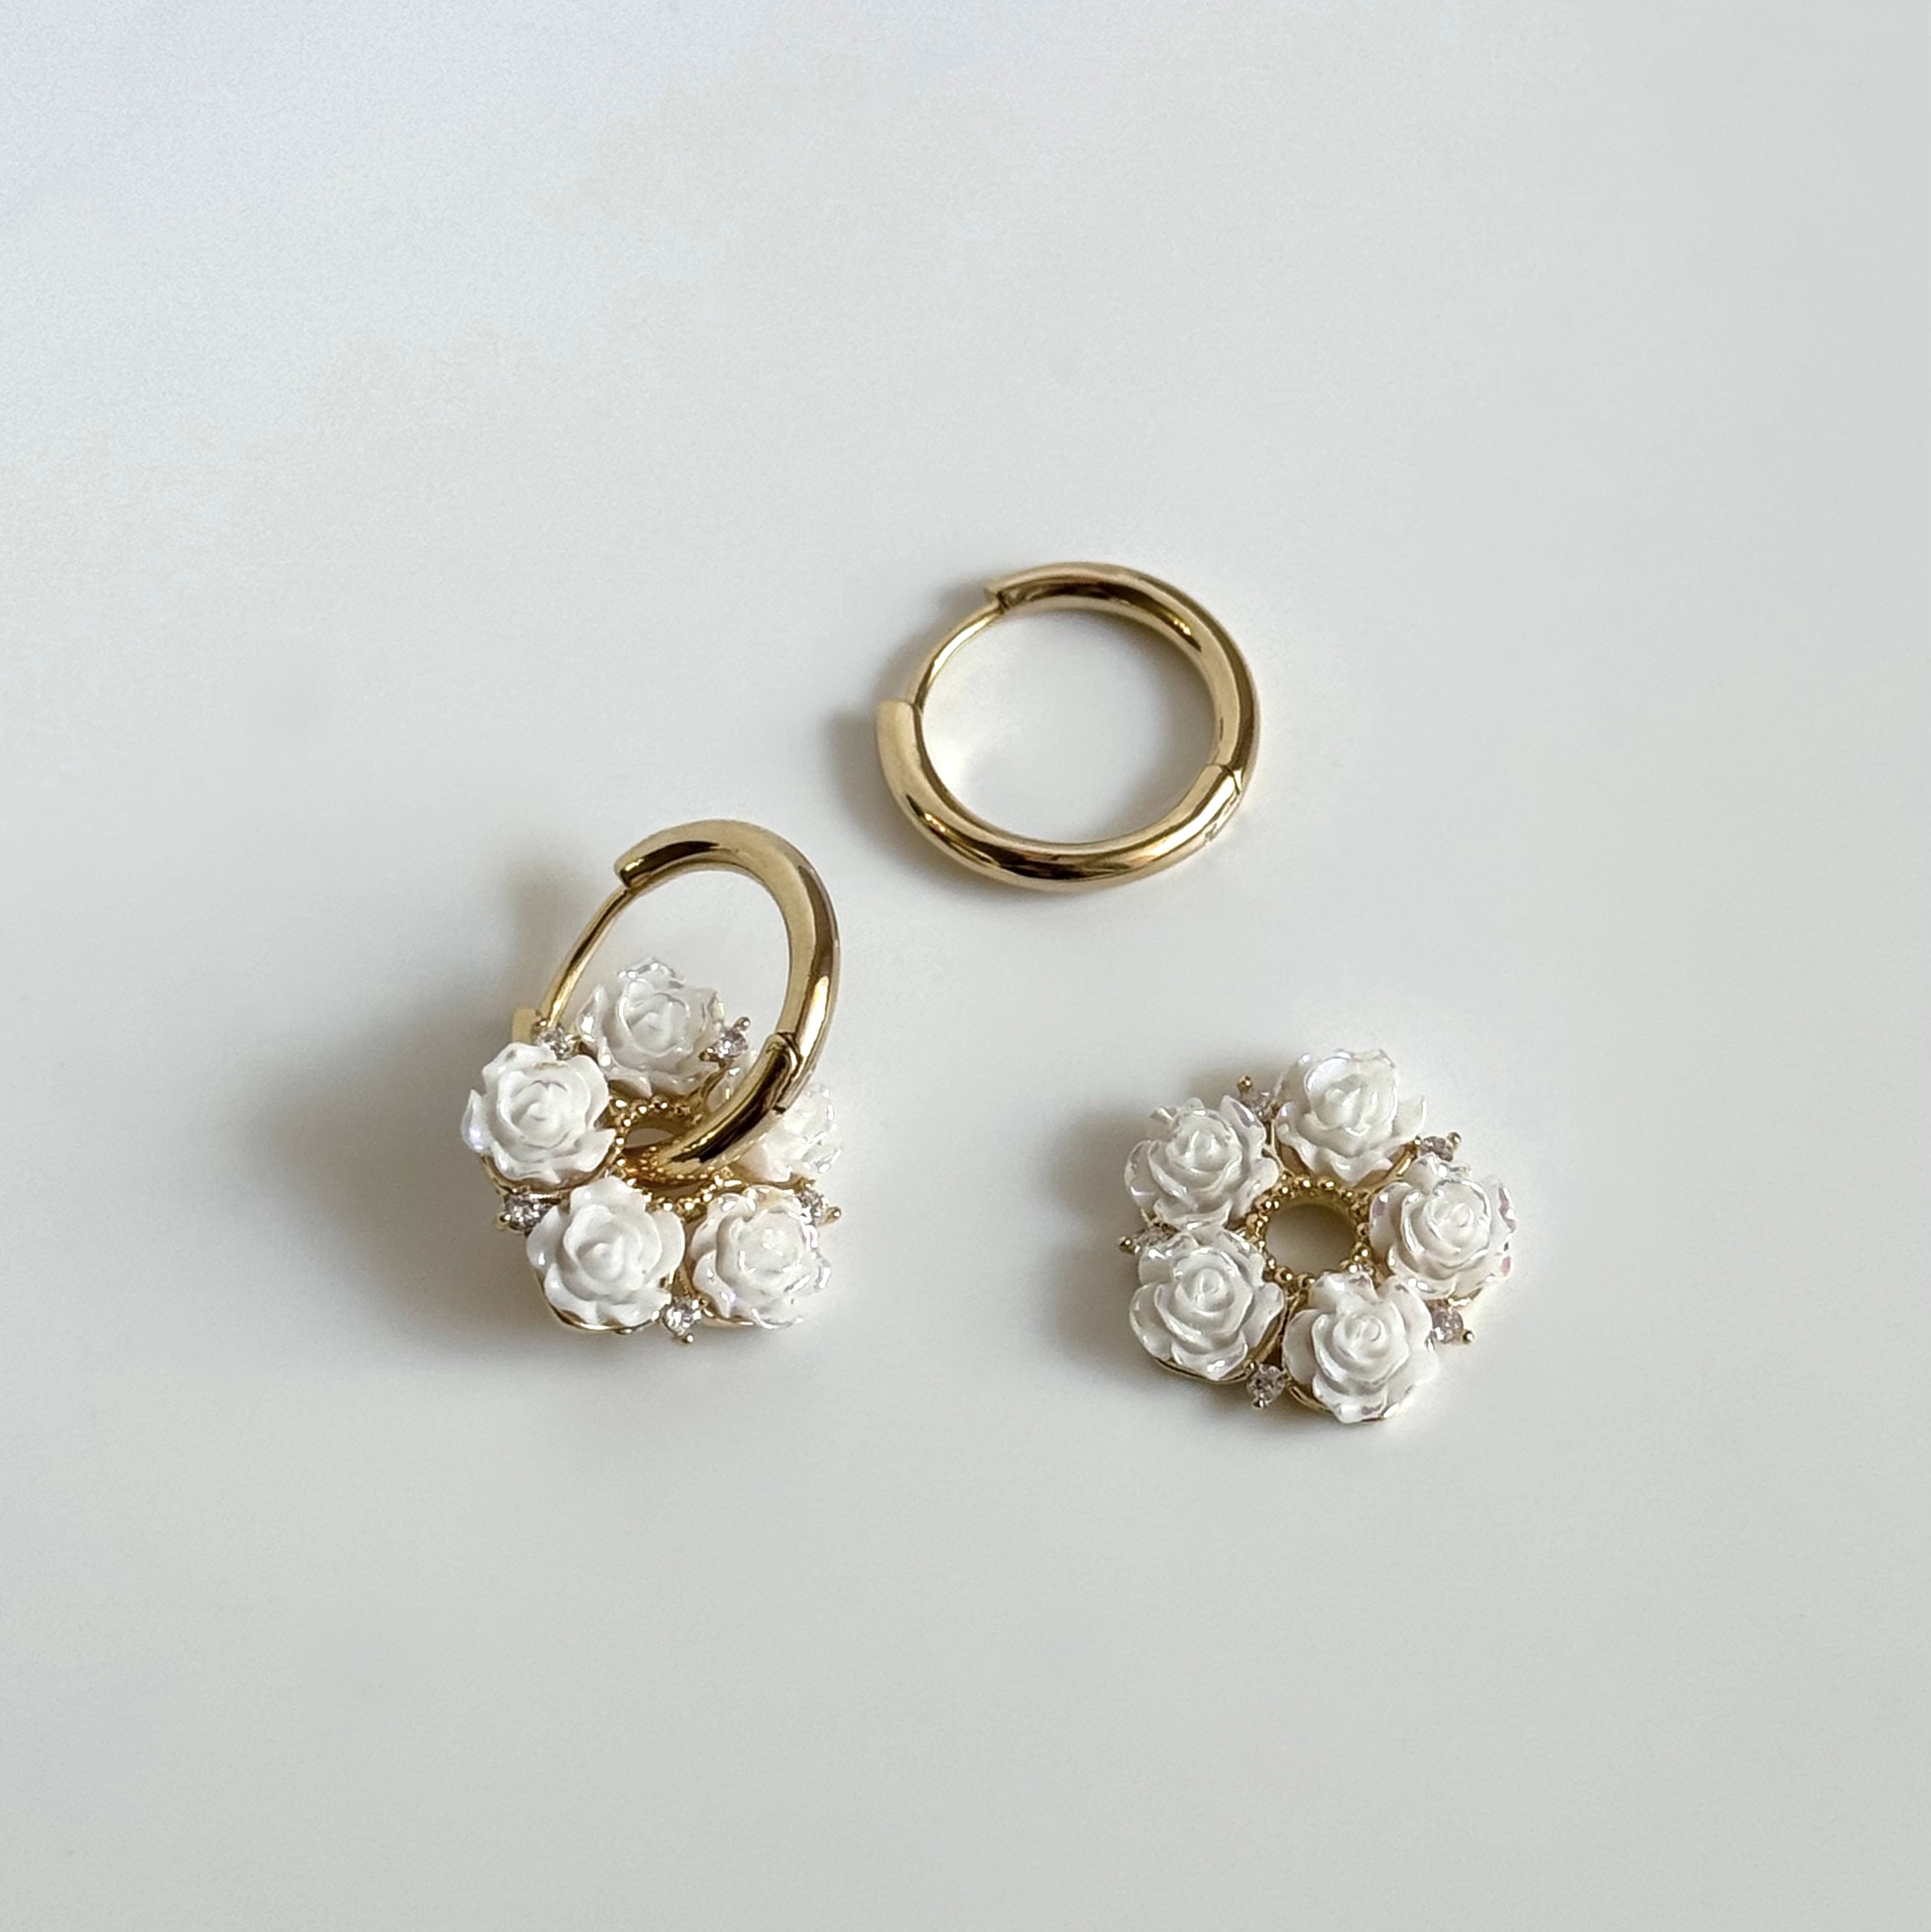 a pair of earrings with flowers